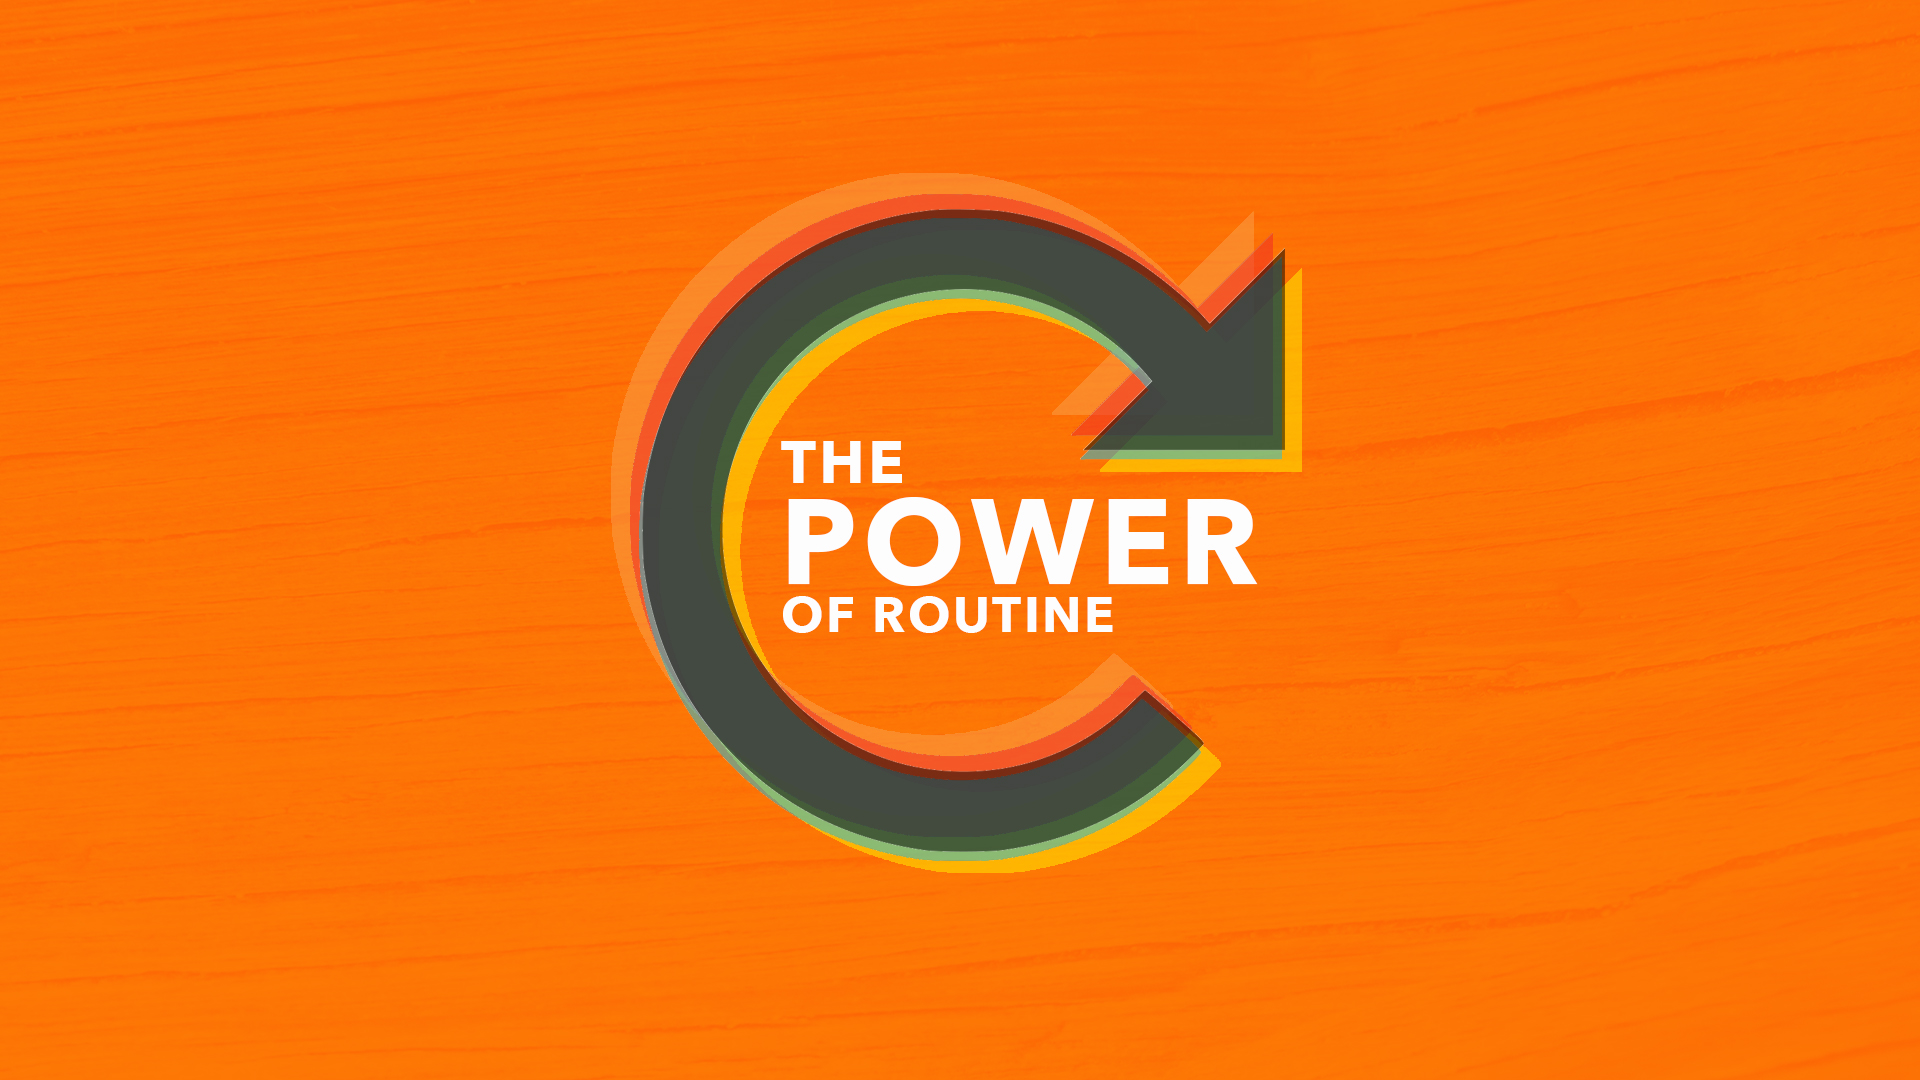 The Power of Routine: Serving Others